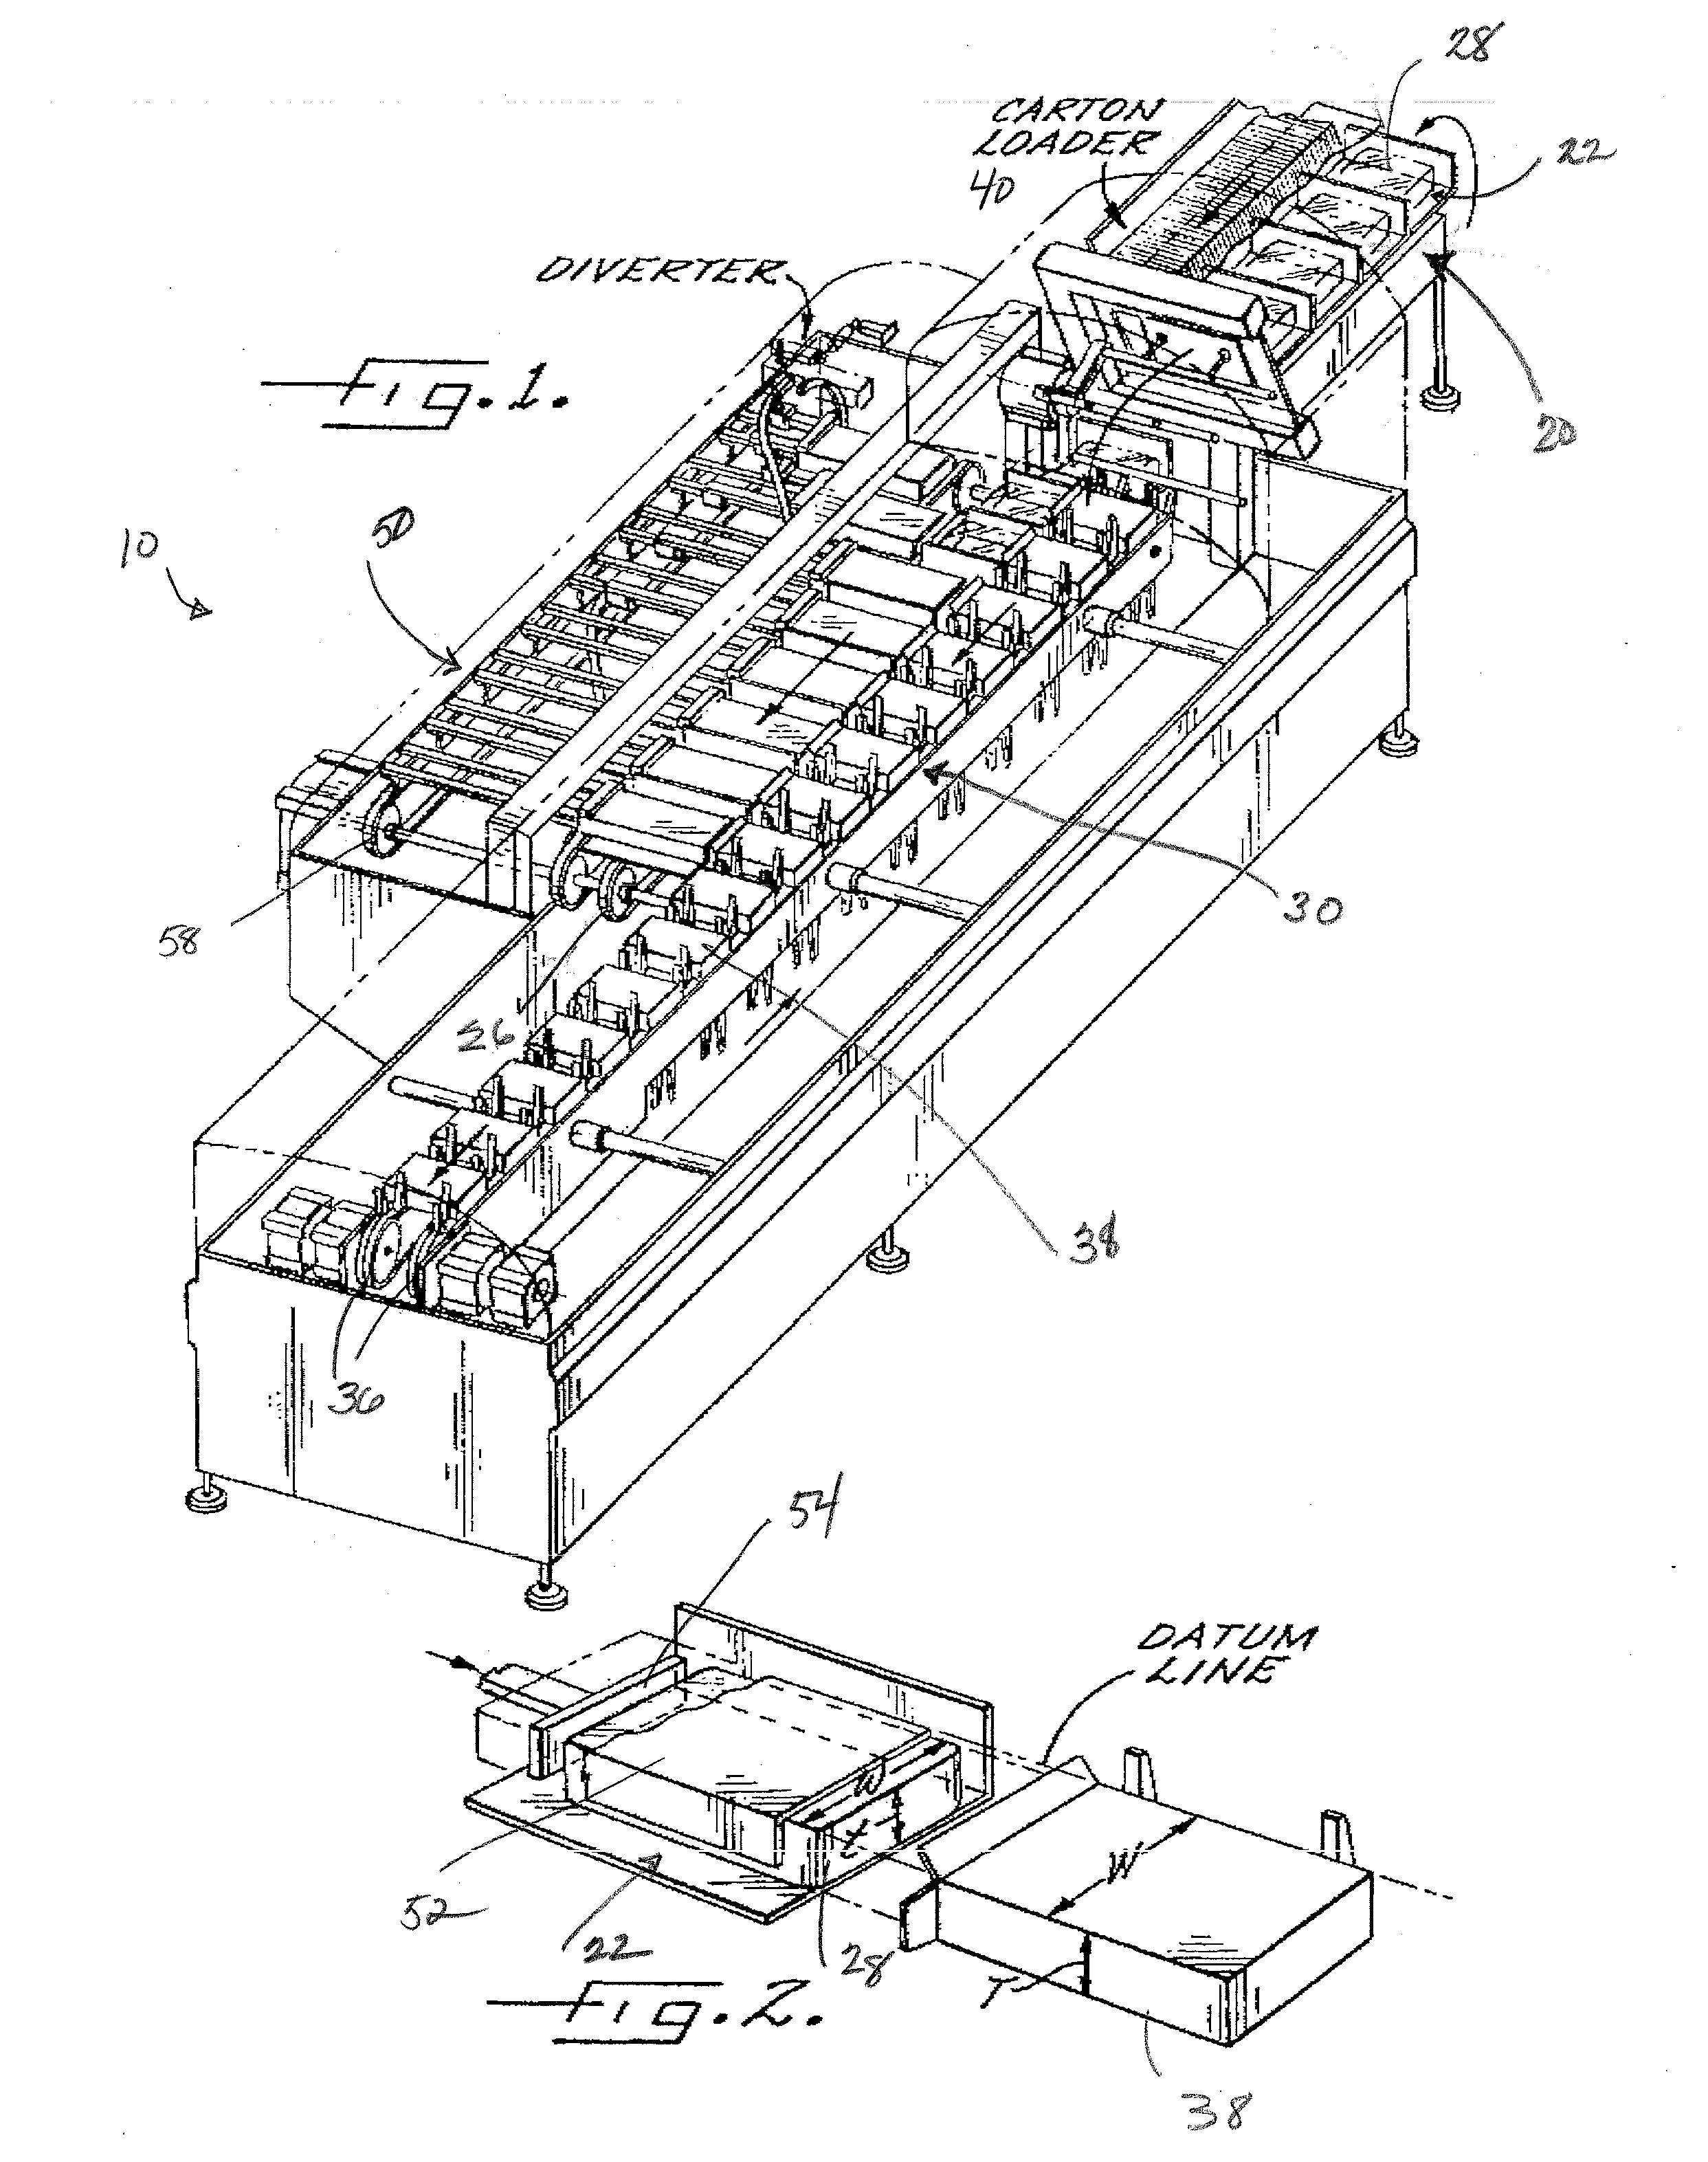 Integrated Barrel Loader and Confiner Apparatus for Use in a Cartoning System